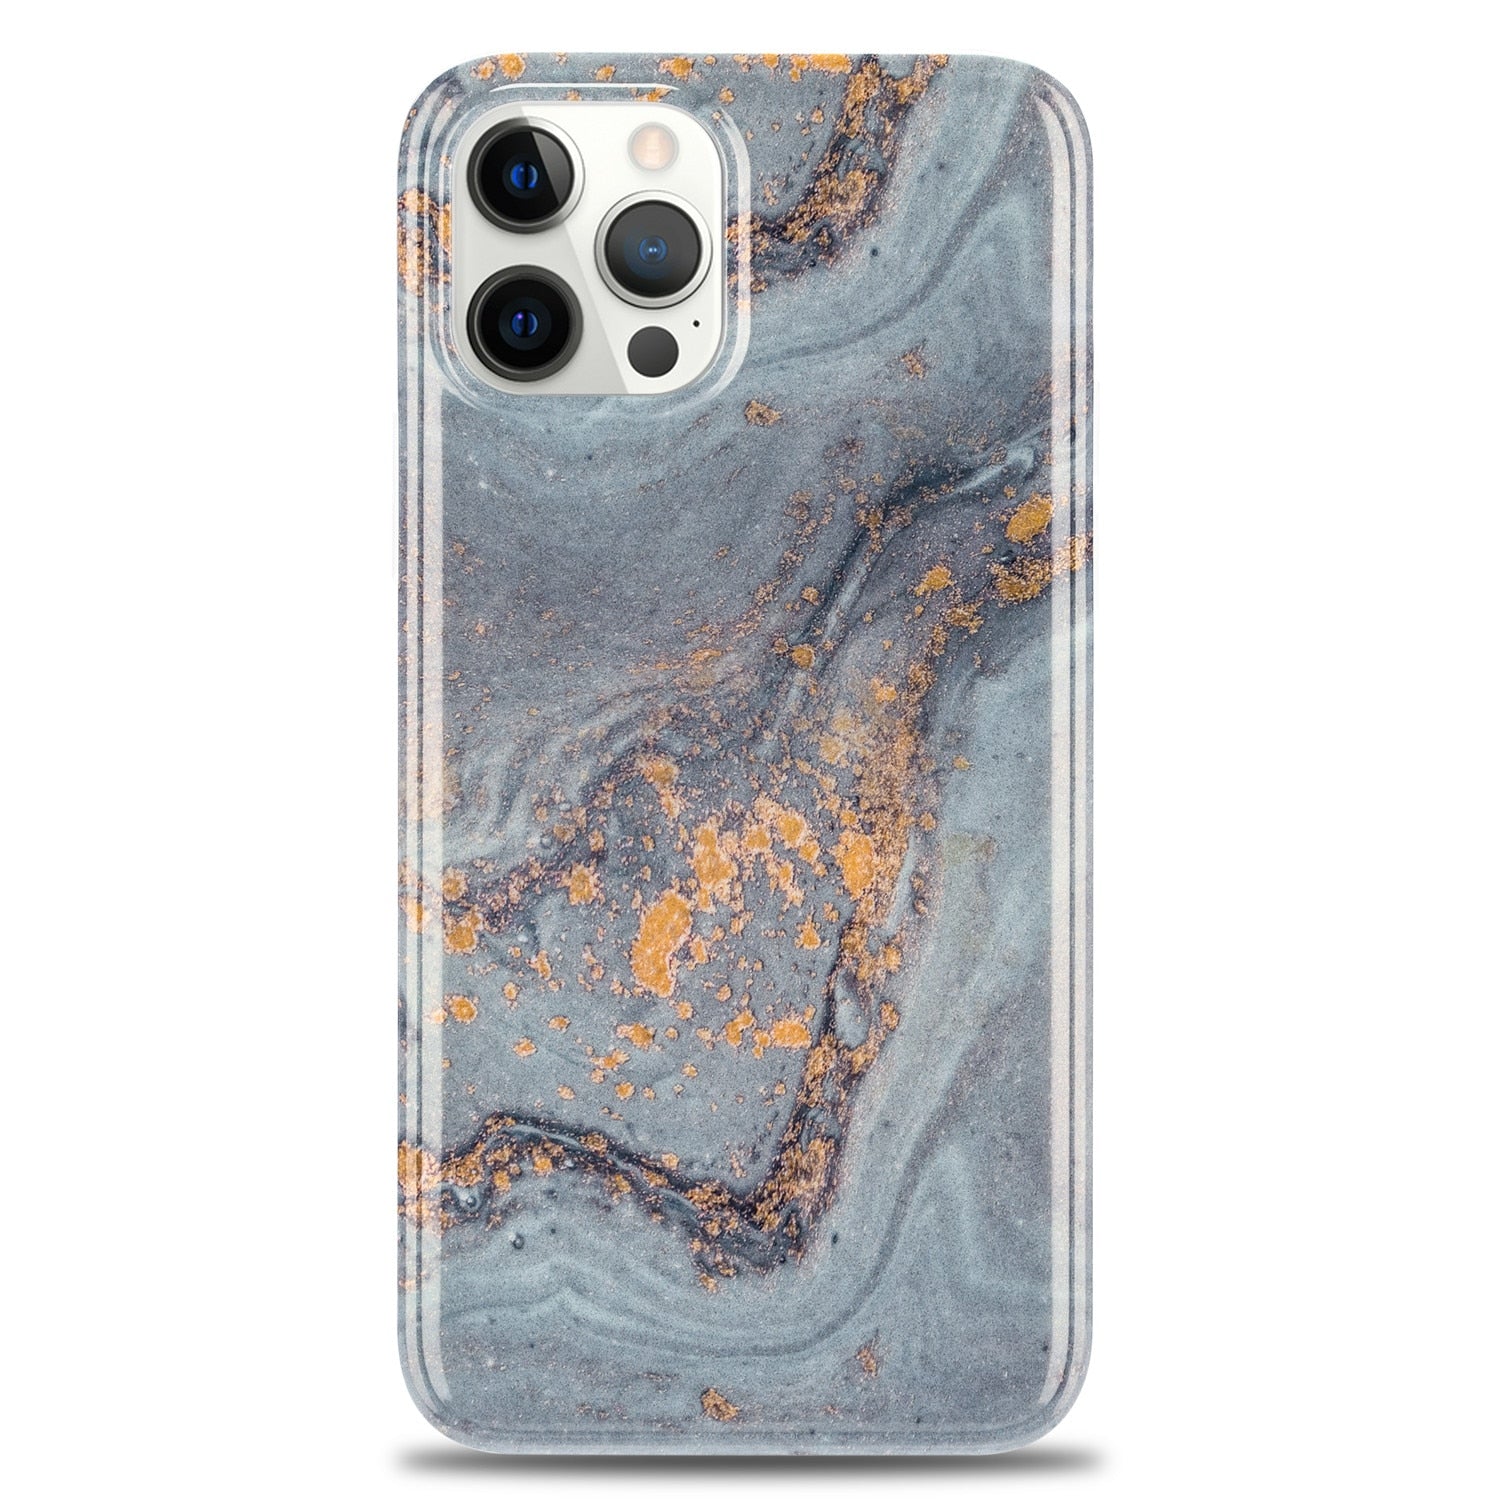 For iPhone 12 Pro Max Case, Gold Sparkle Glitter Marble Slim Shockproof Flexible Bumper TPU Soft Case Rubber Silicone Cover Case - 380230 for iPhone 12 / Light Blue / United States Find Epic Store